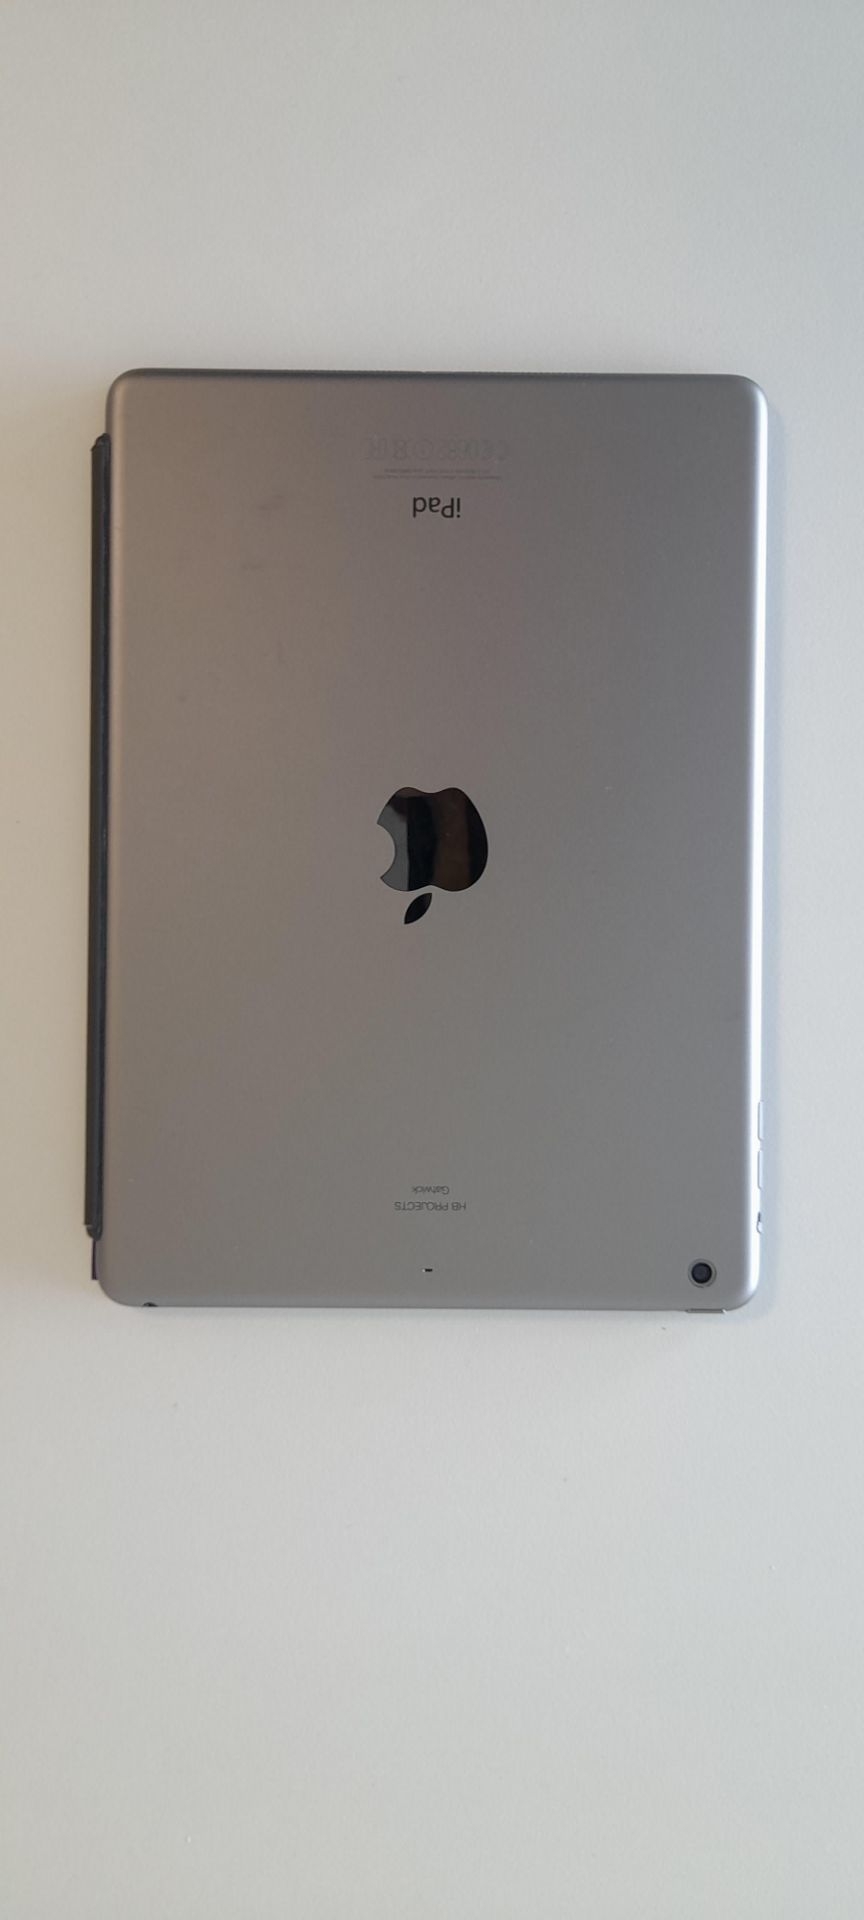 Apple iPad Air Wi-Fi, Model A1474, Space Grey. S/N DMPQL561FK129. Collection from Canary Wharf, - Image 4 of 6